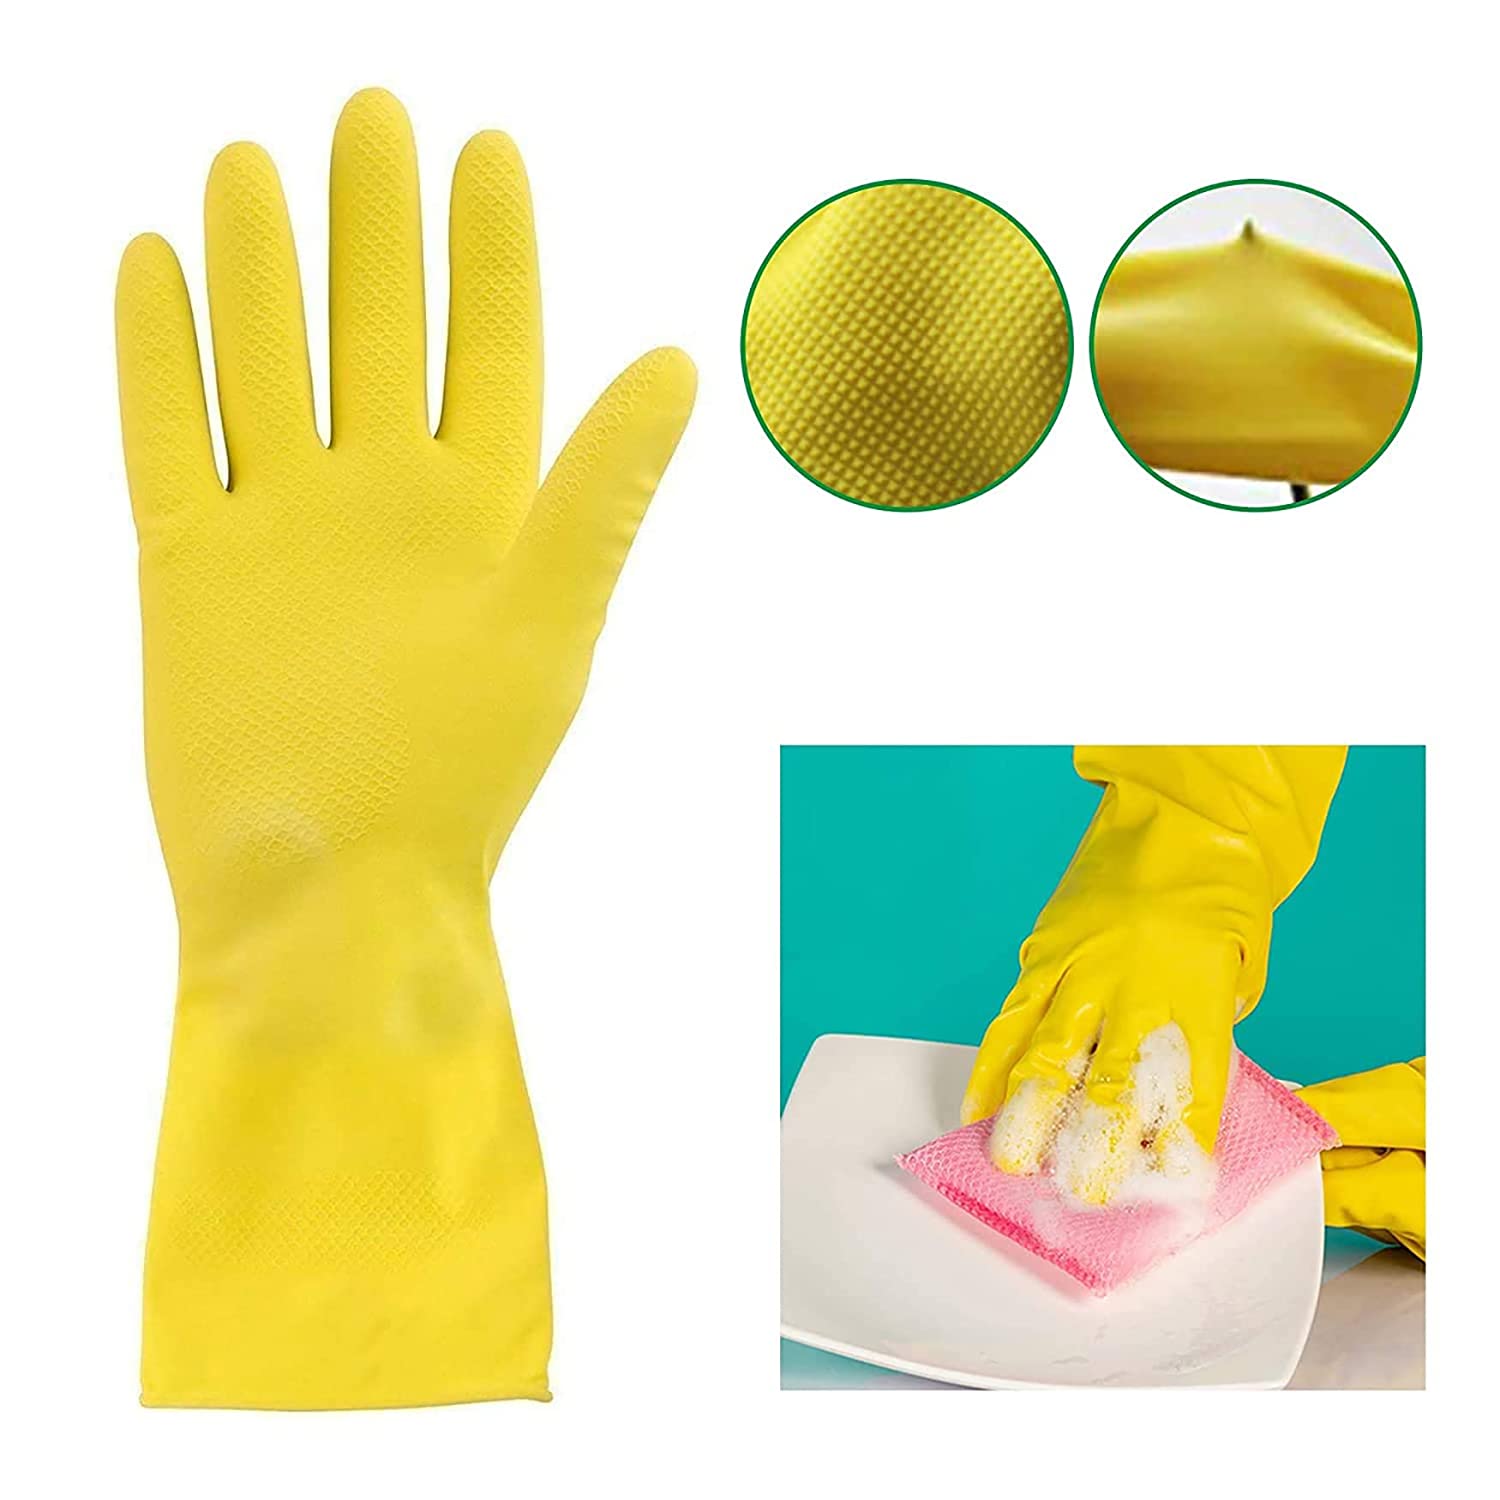 latex gloves; chemical resistance glove; heavy duty gloves; industrial gloves